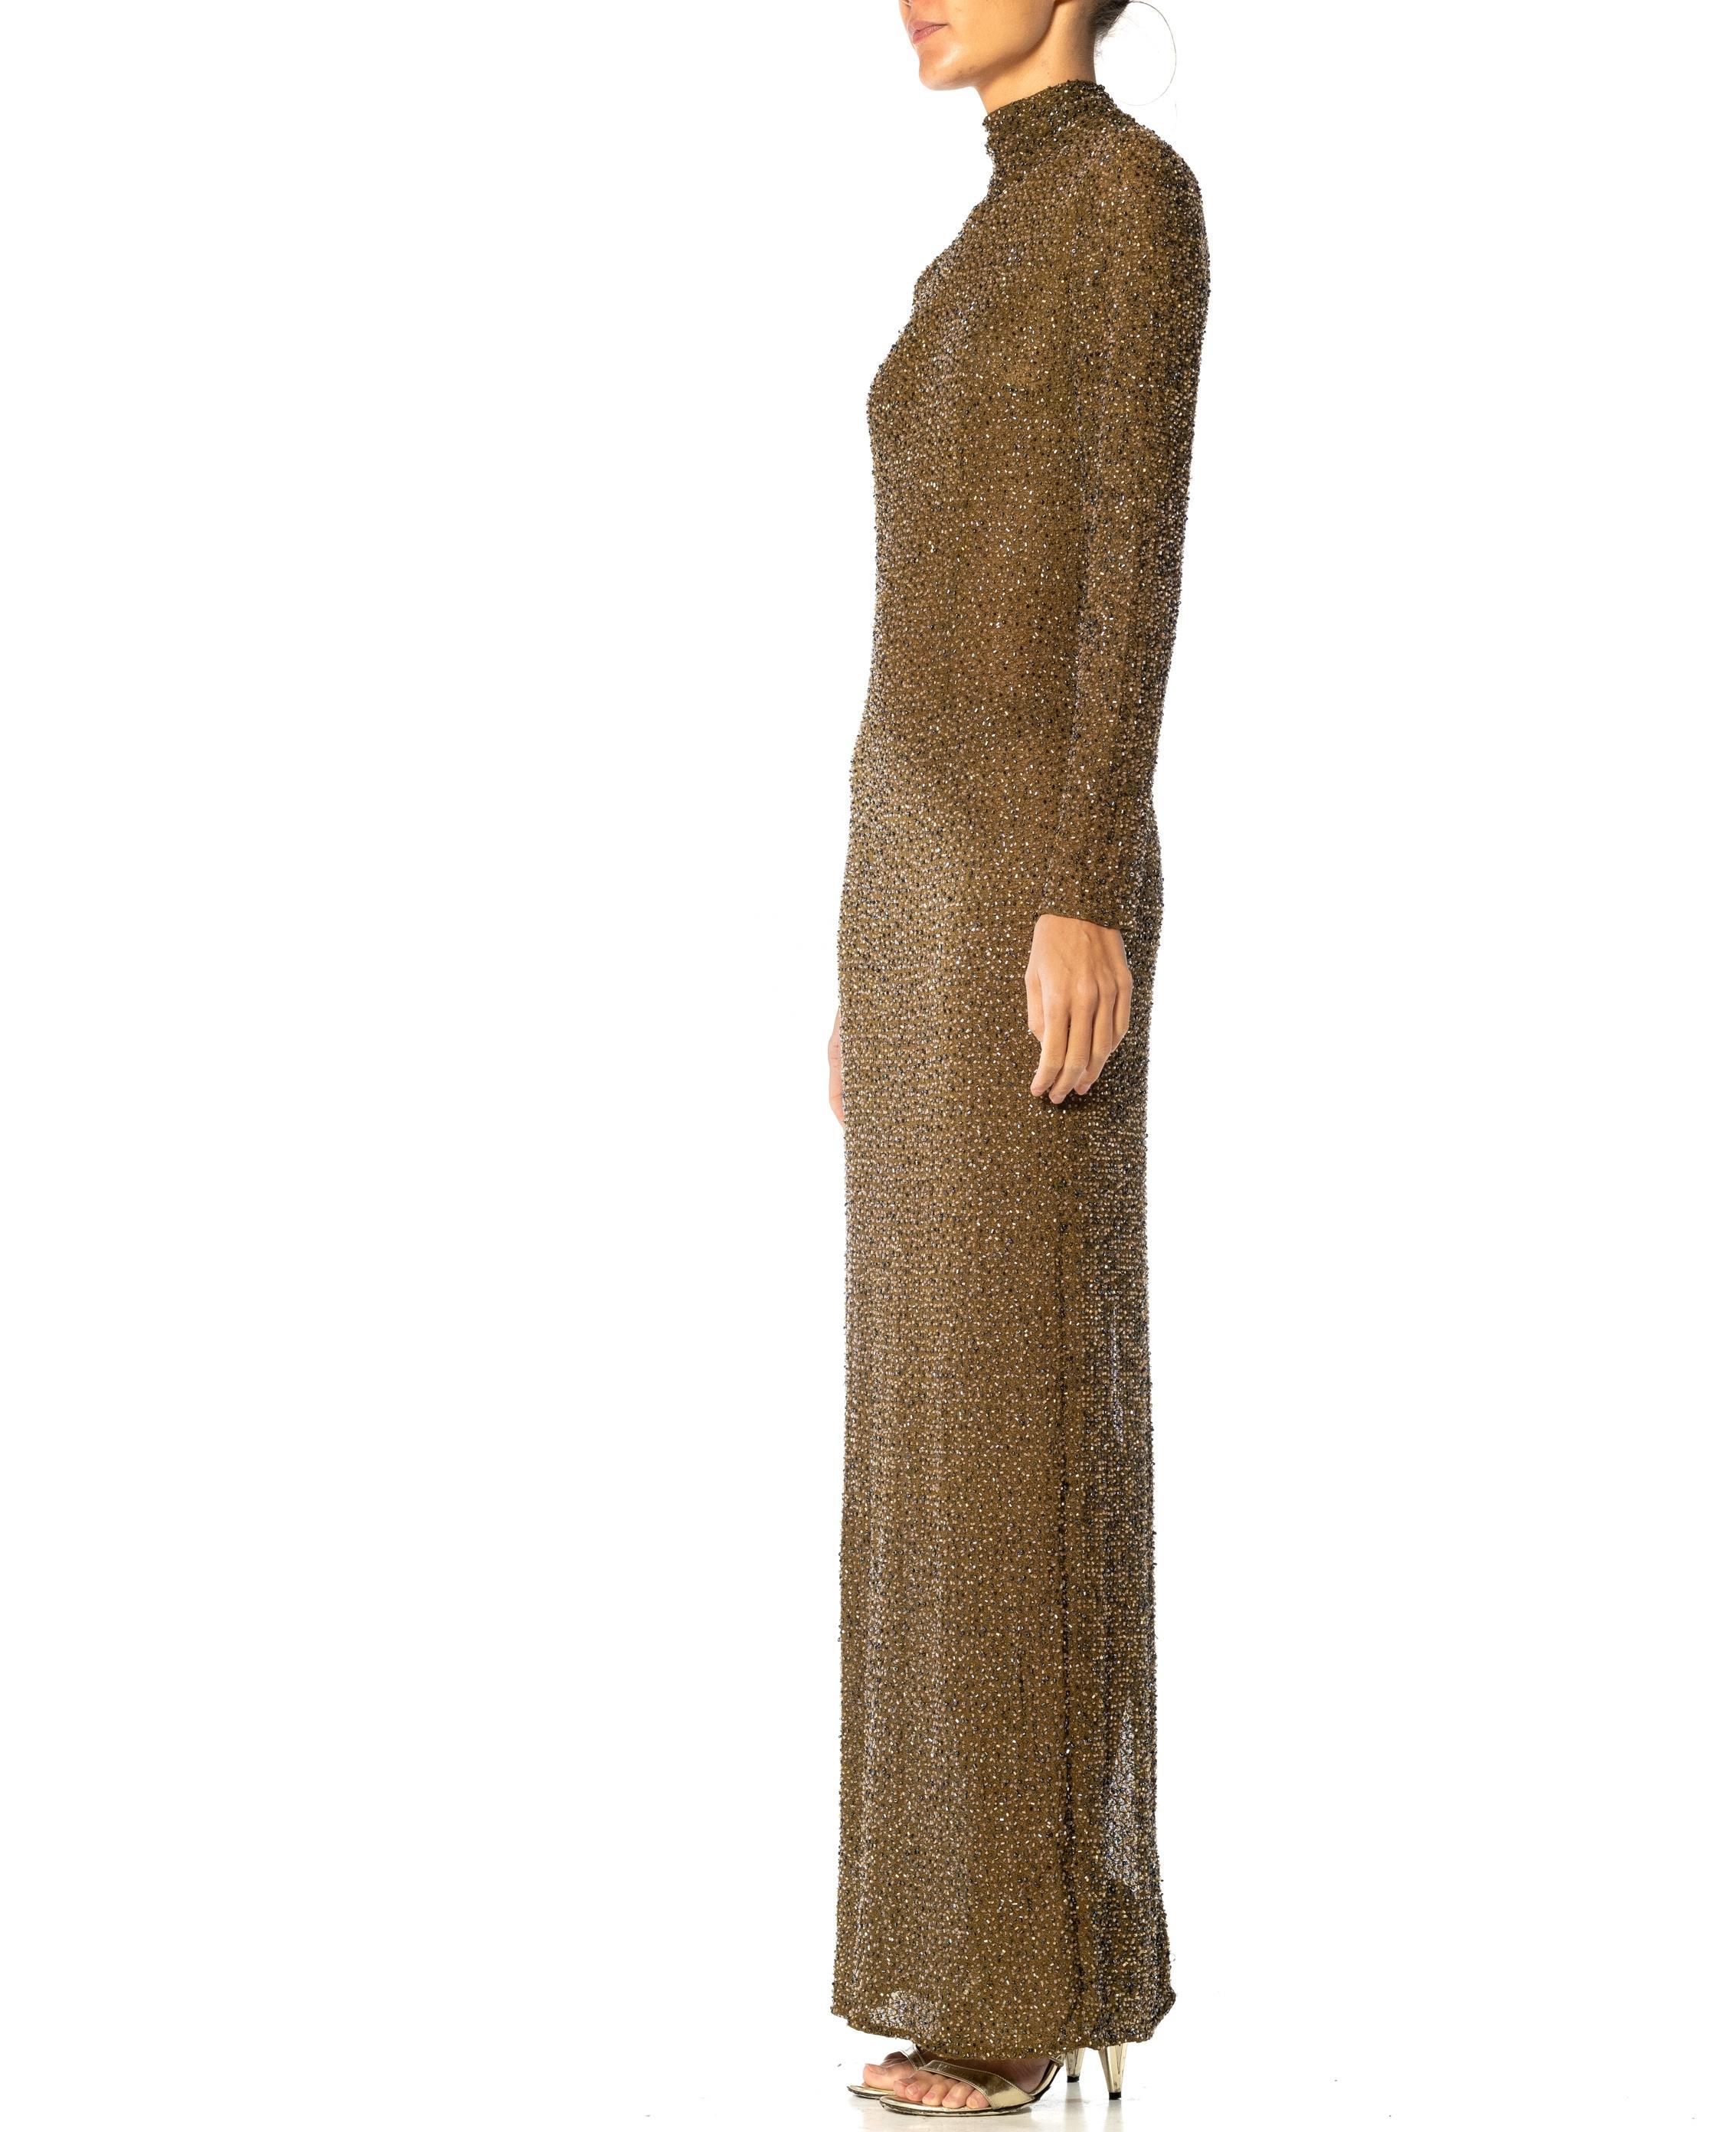 This body hugging gown has a lot of stretch and is perfect for showing off all your curves whilst retaining a skin covered mystique. 1990S Olive Green Rayon & Elastane Mesh Stretch Long Sleeve Beaded Gown 